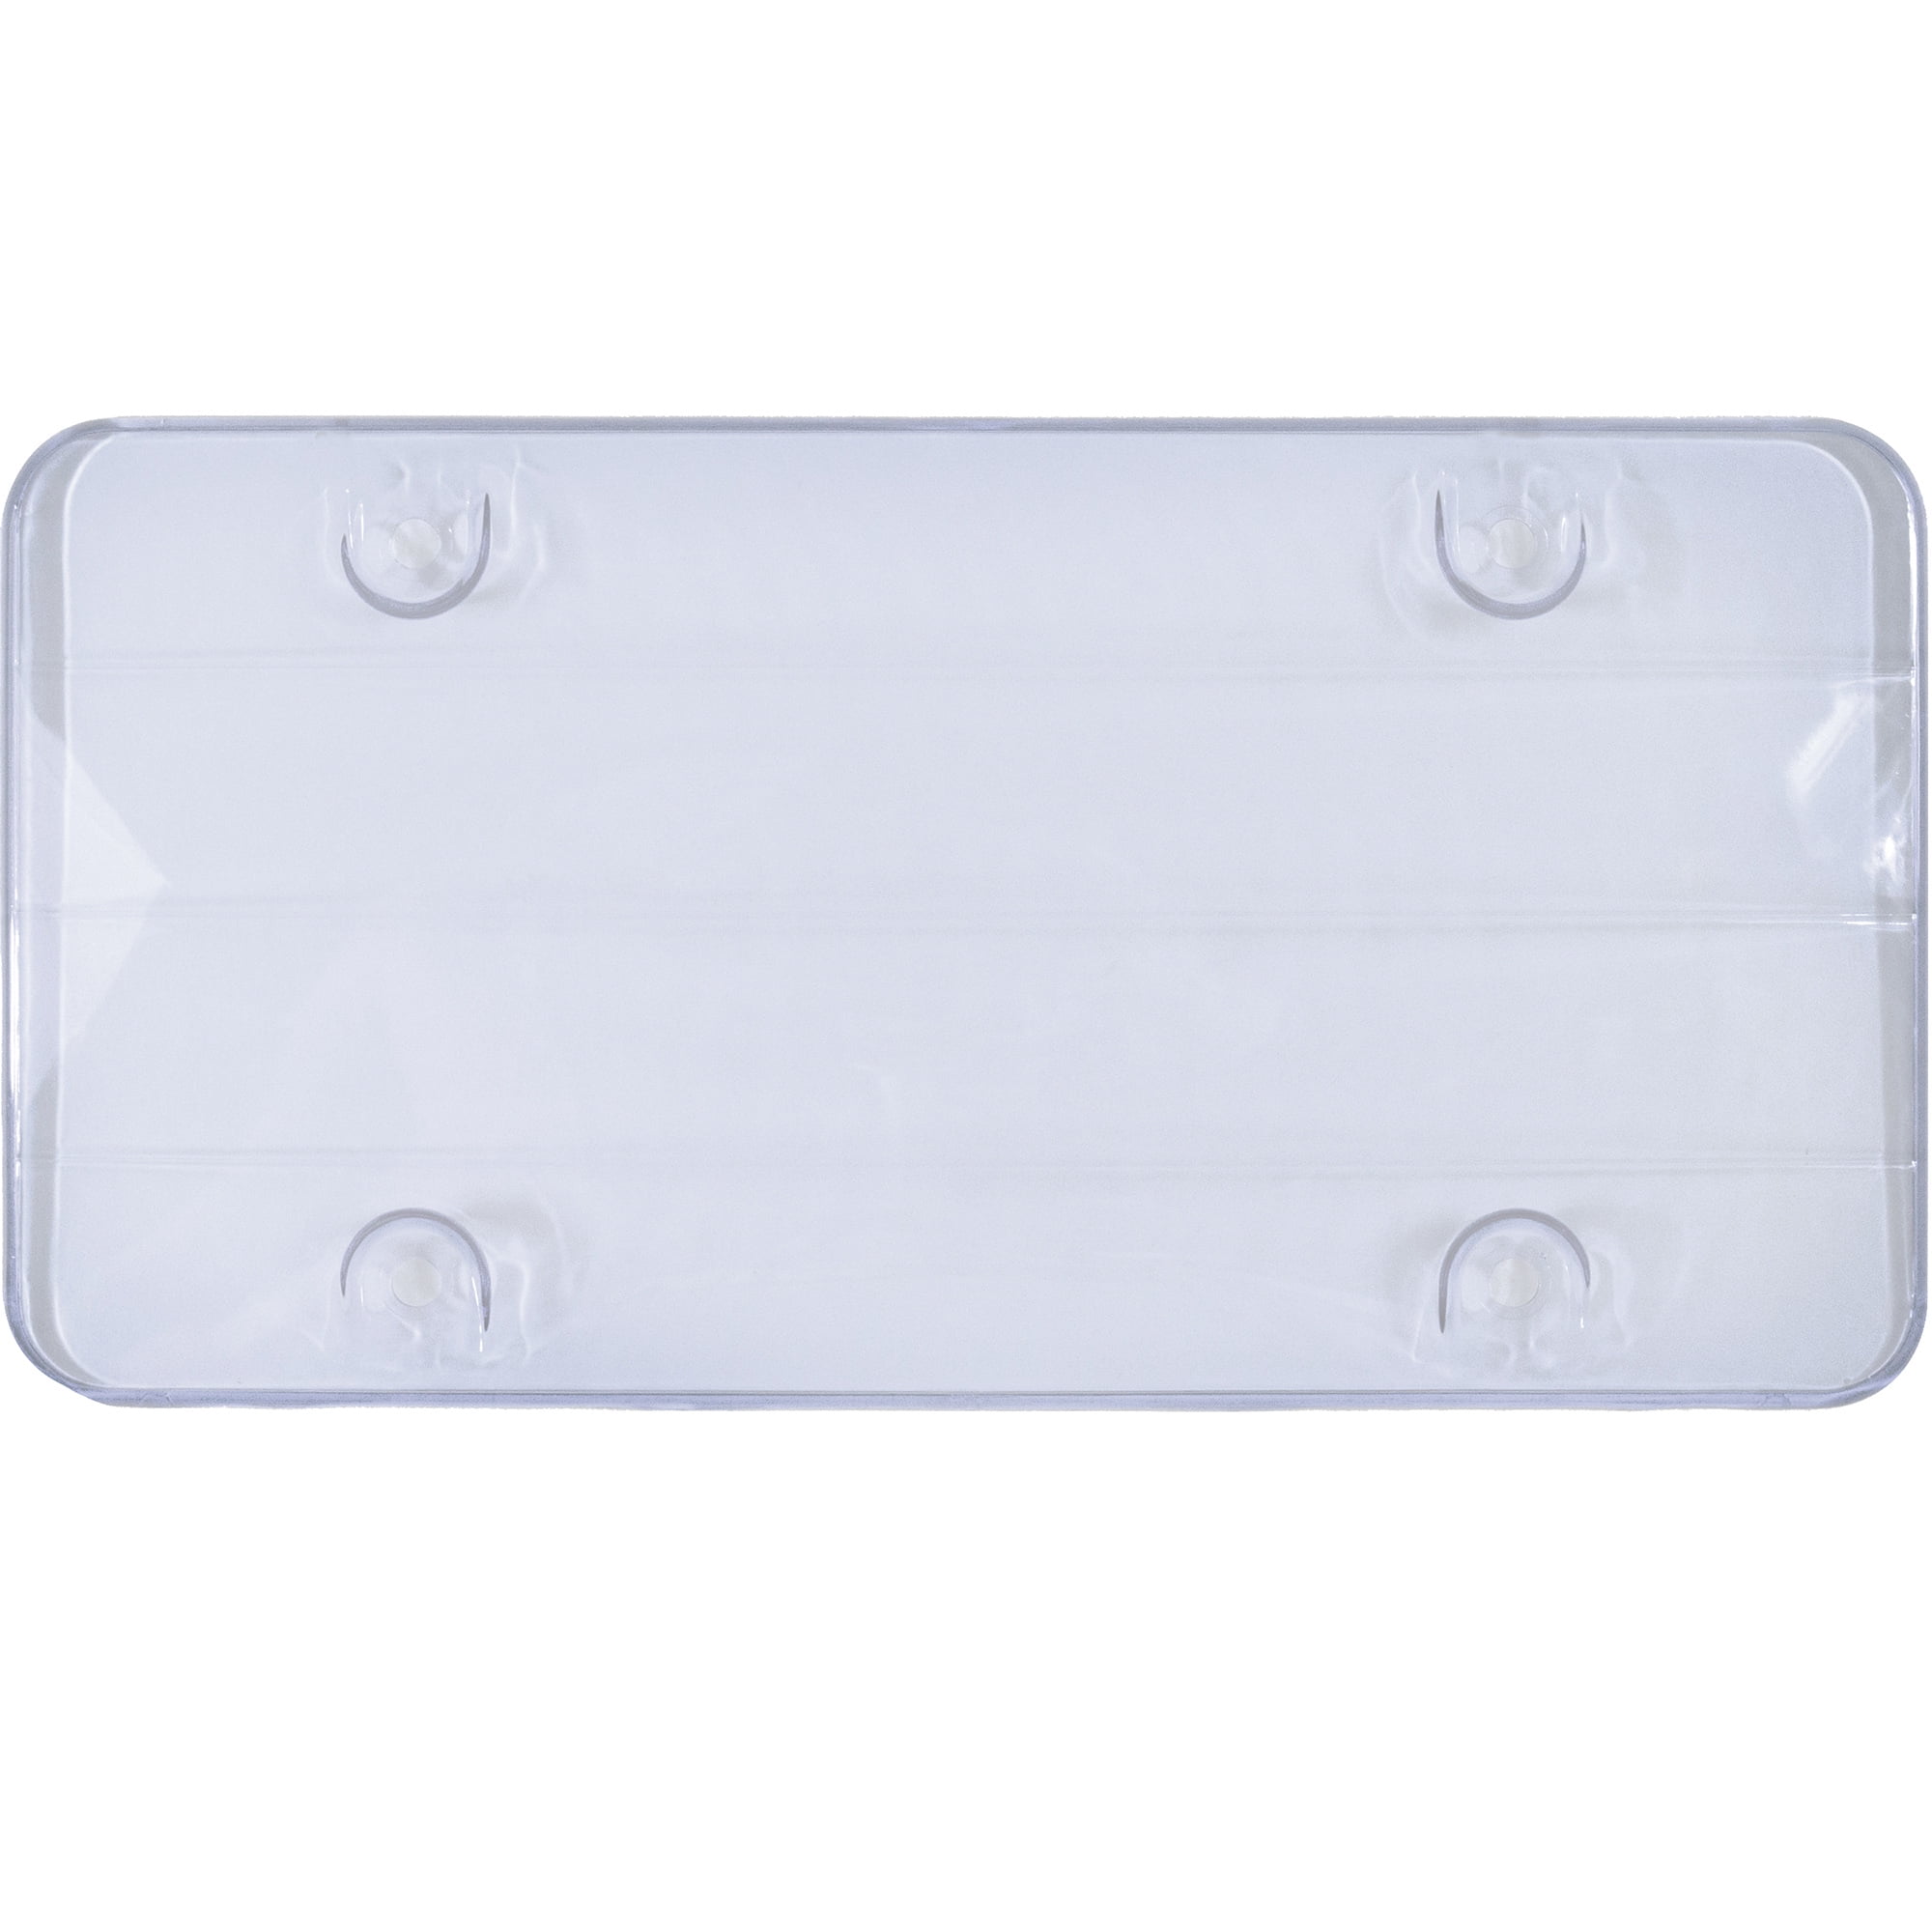 GET CO-95-CL Round Clear Polypropylene Plate Cover for 10 3/8 to 11 3/